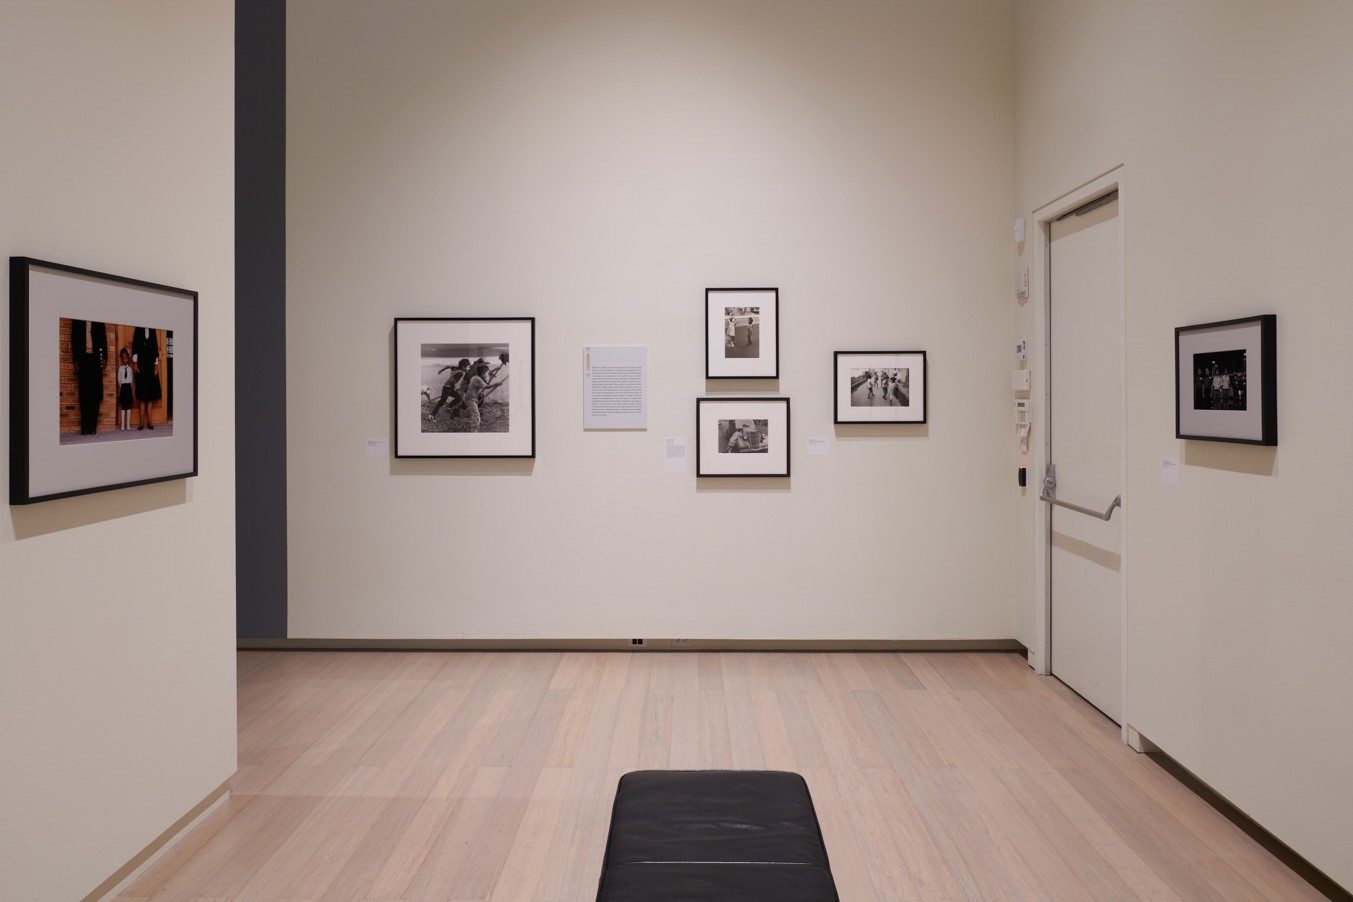 Installation view of the exhibition "Time and Face: Daguerreotypes to Digital Print", on view at the Wallach Art Gallery, Columbia University December 4, 2021-March 12, 2022.